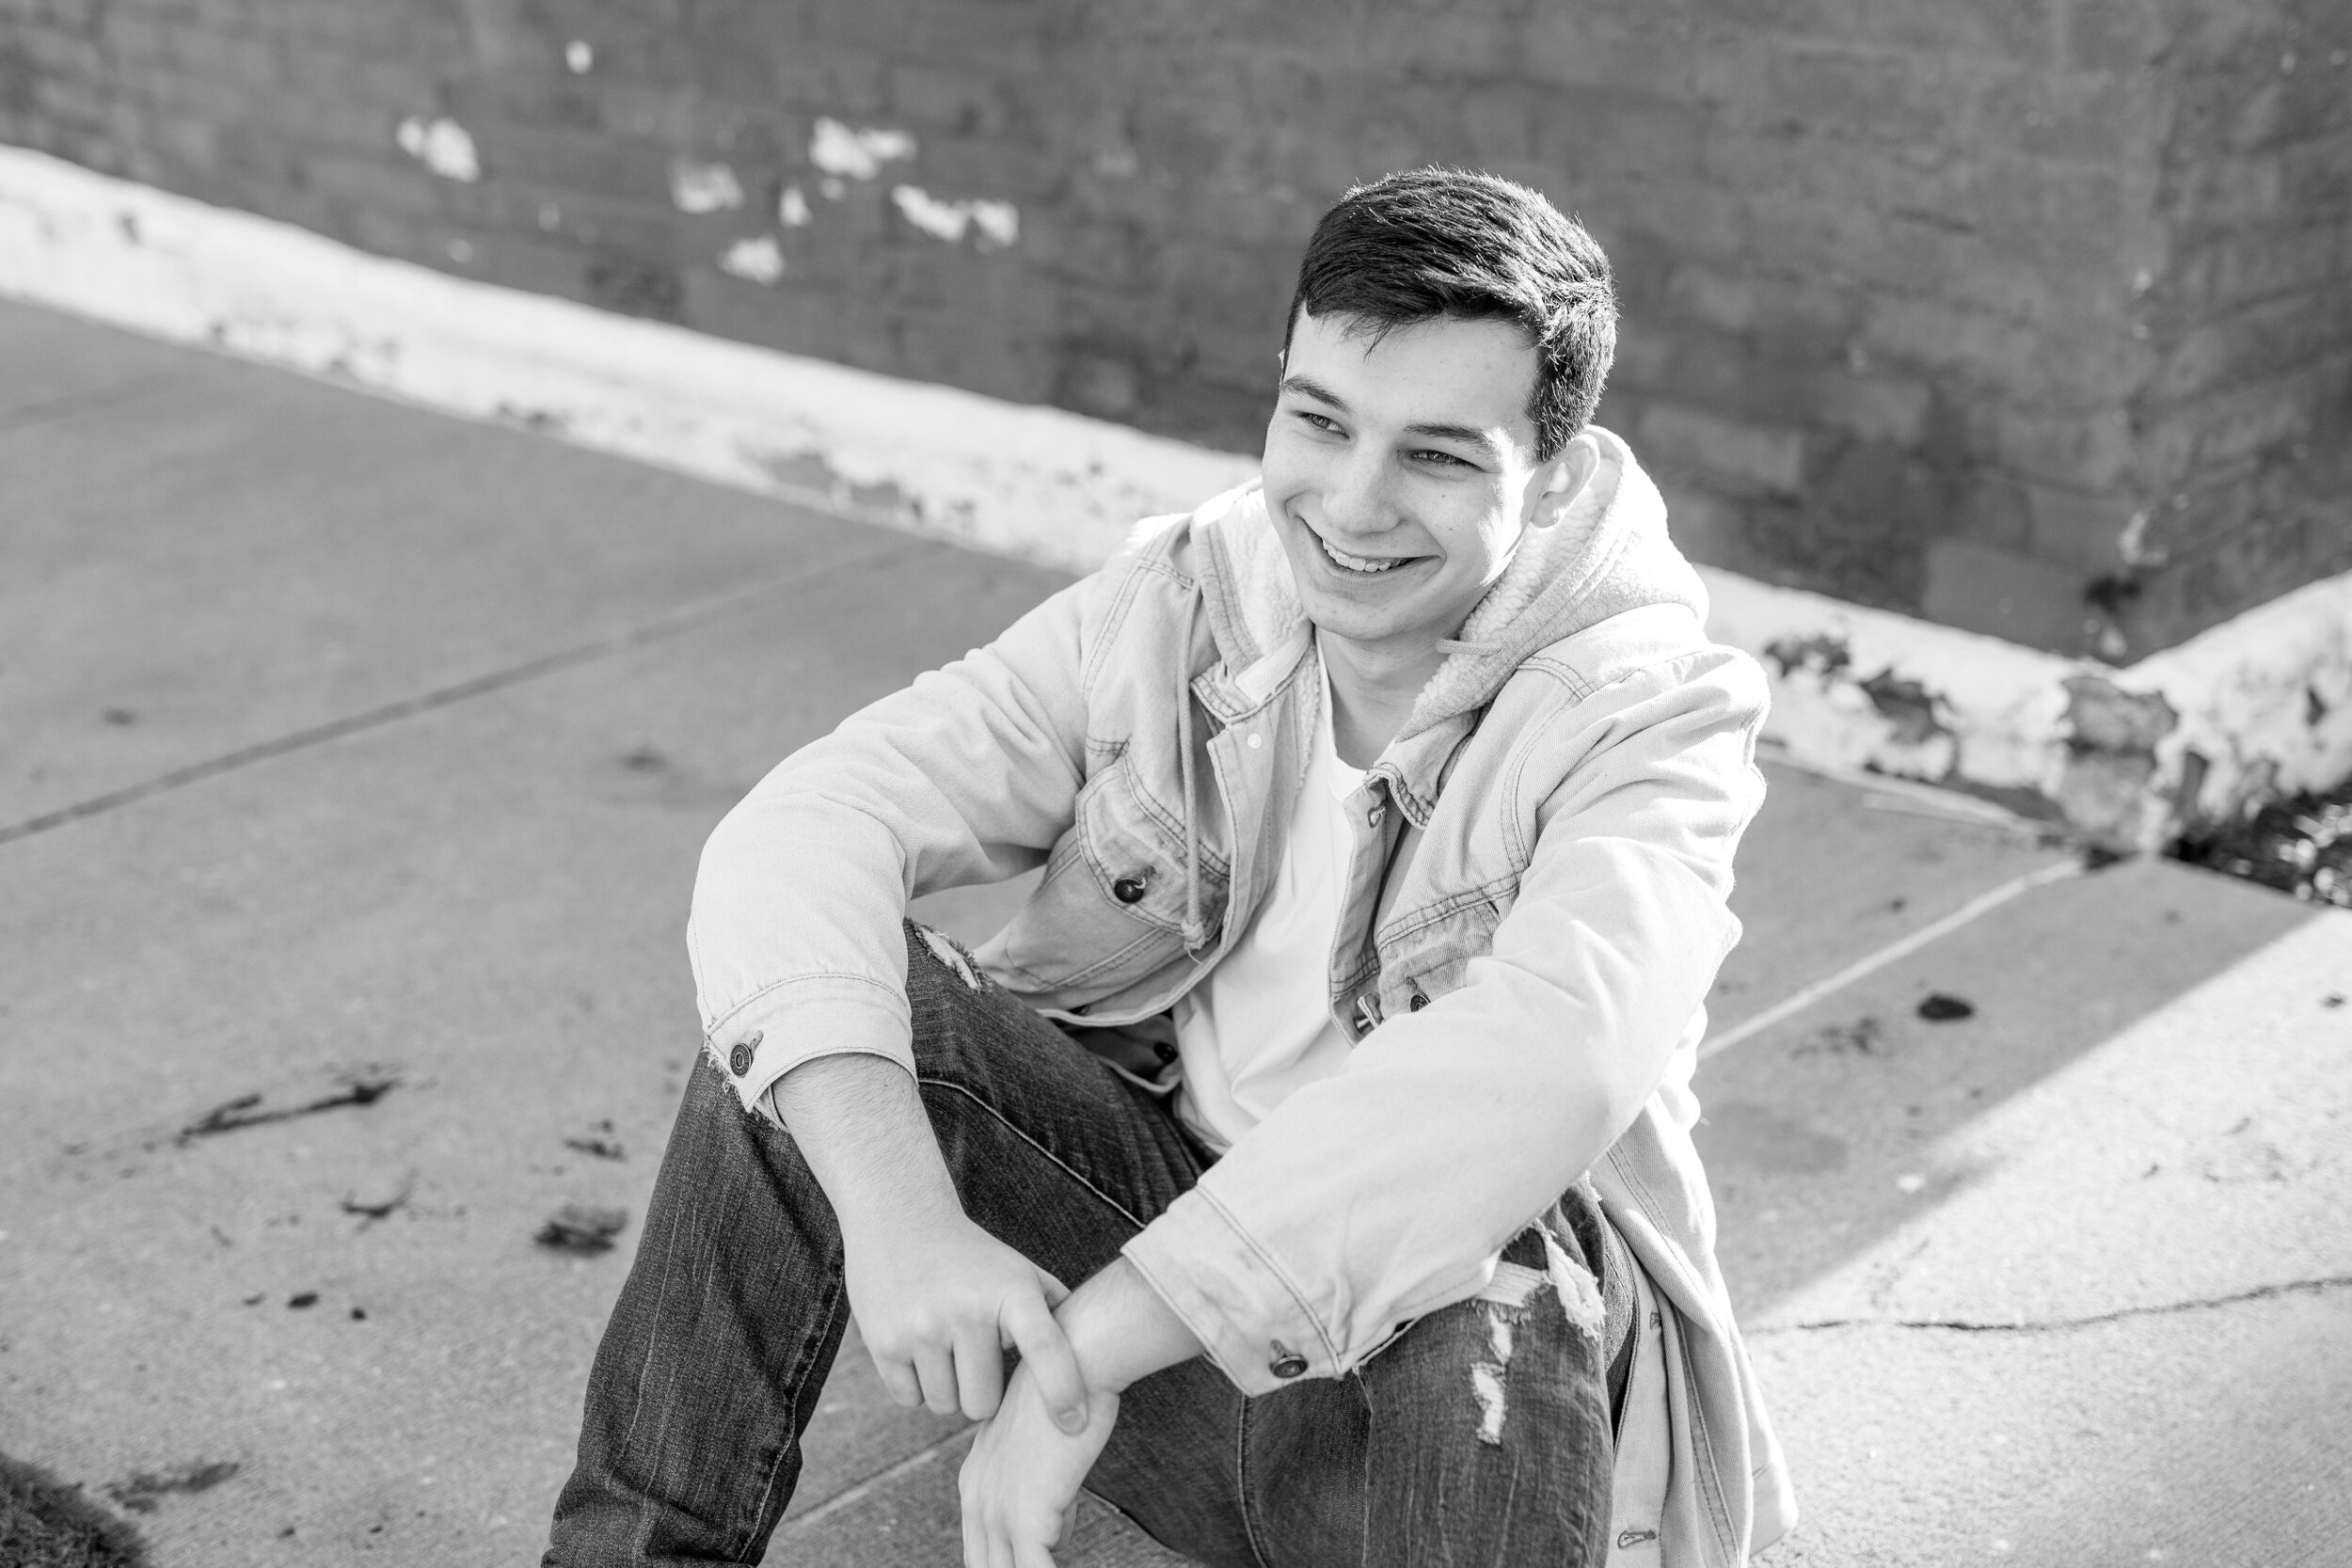 senior pictures pittsburgh, cranberry township senior photographer, zelienople senior photographer, locations for senior photos pittsburgh